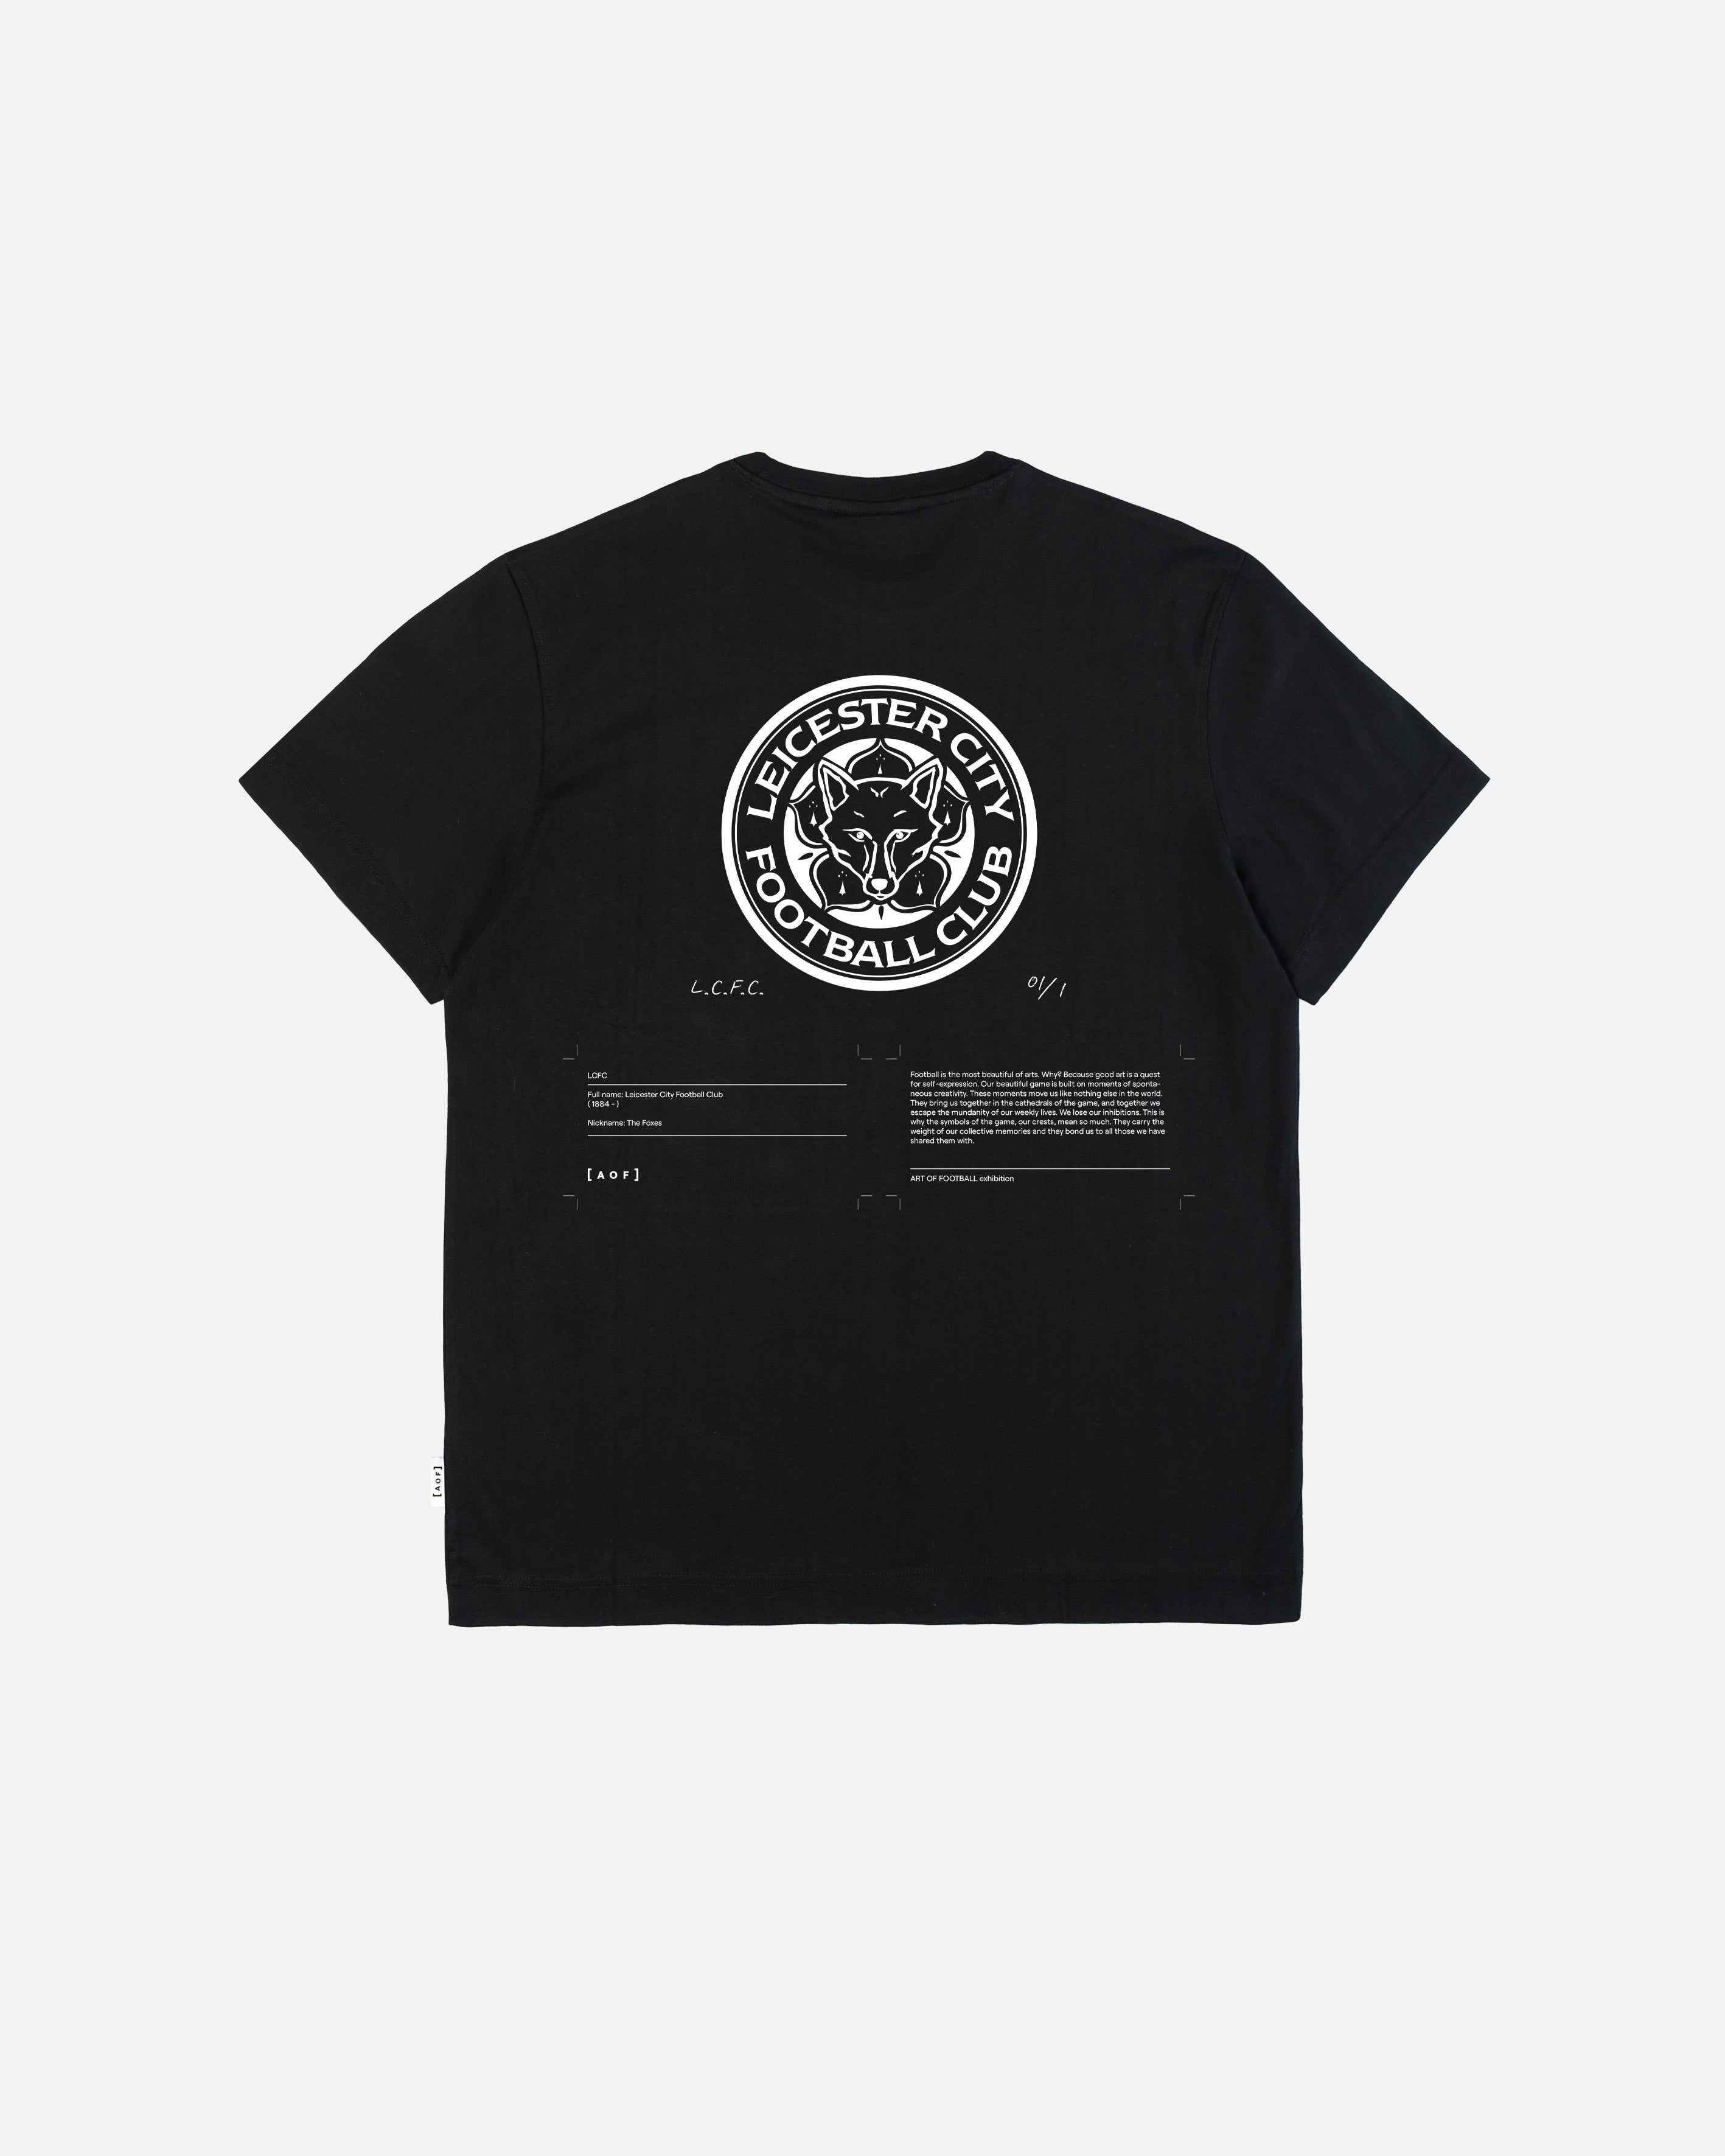 AOF x Leicester - Exhibition - Tee